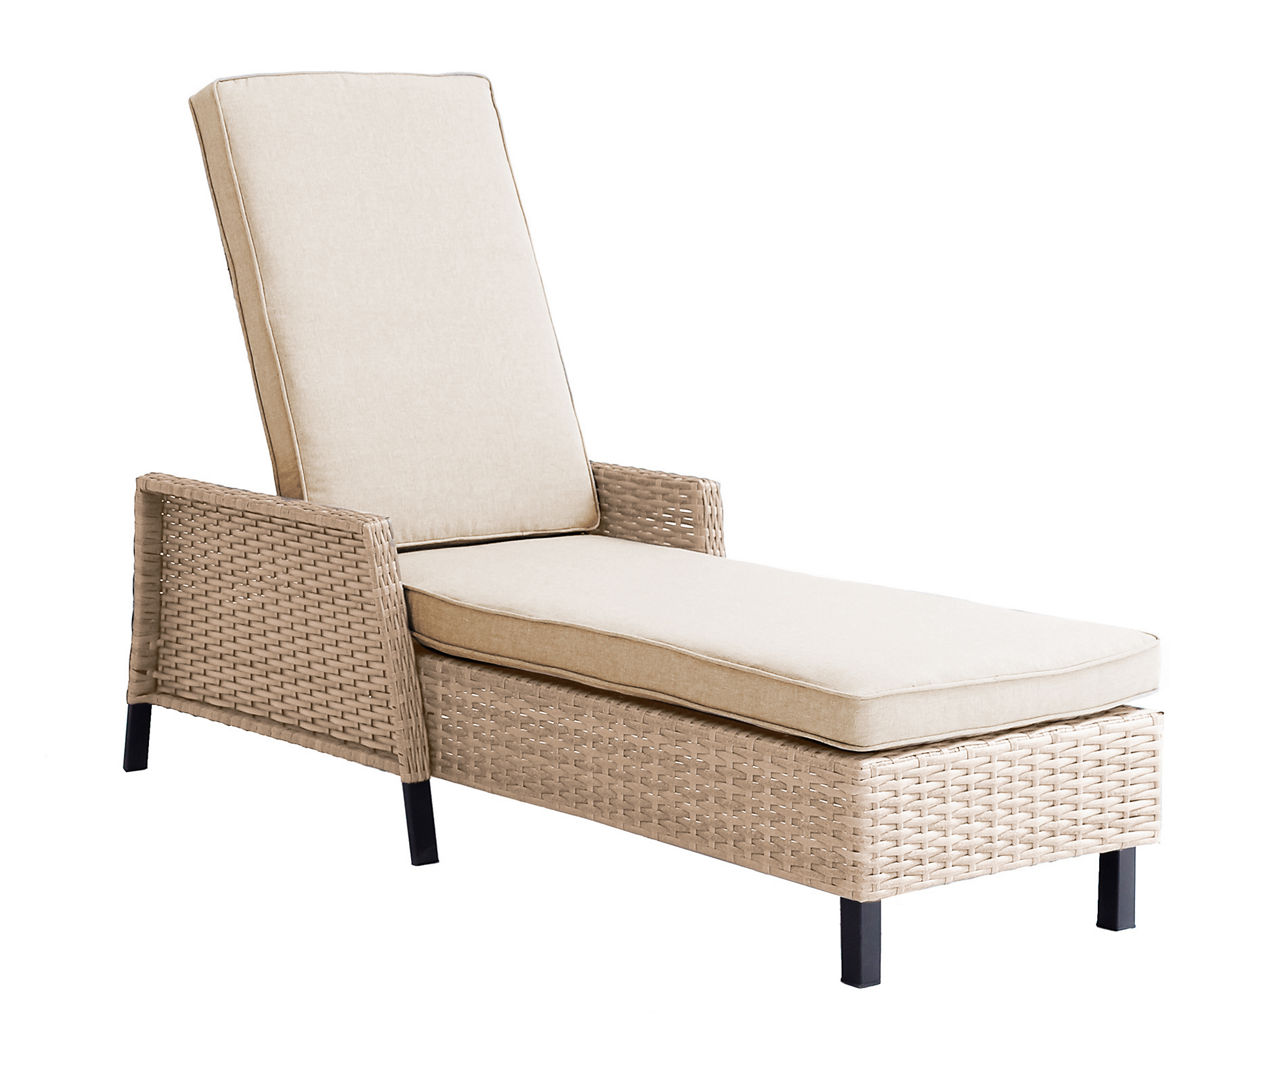 Yorktown Tan All-Weather Wicker Cushioned Patio Chaise Lounge